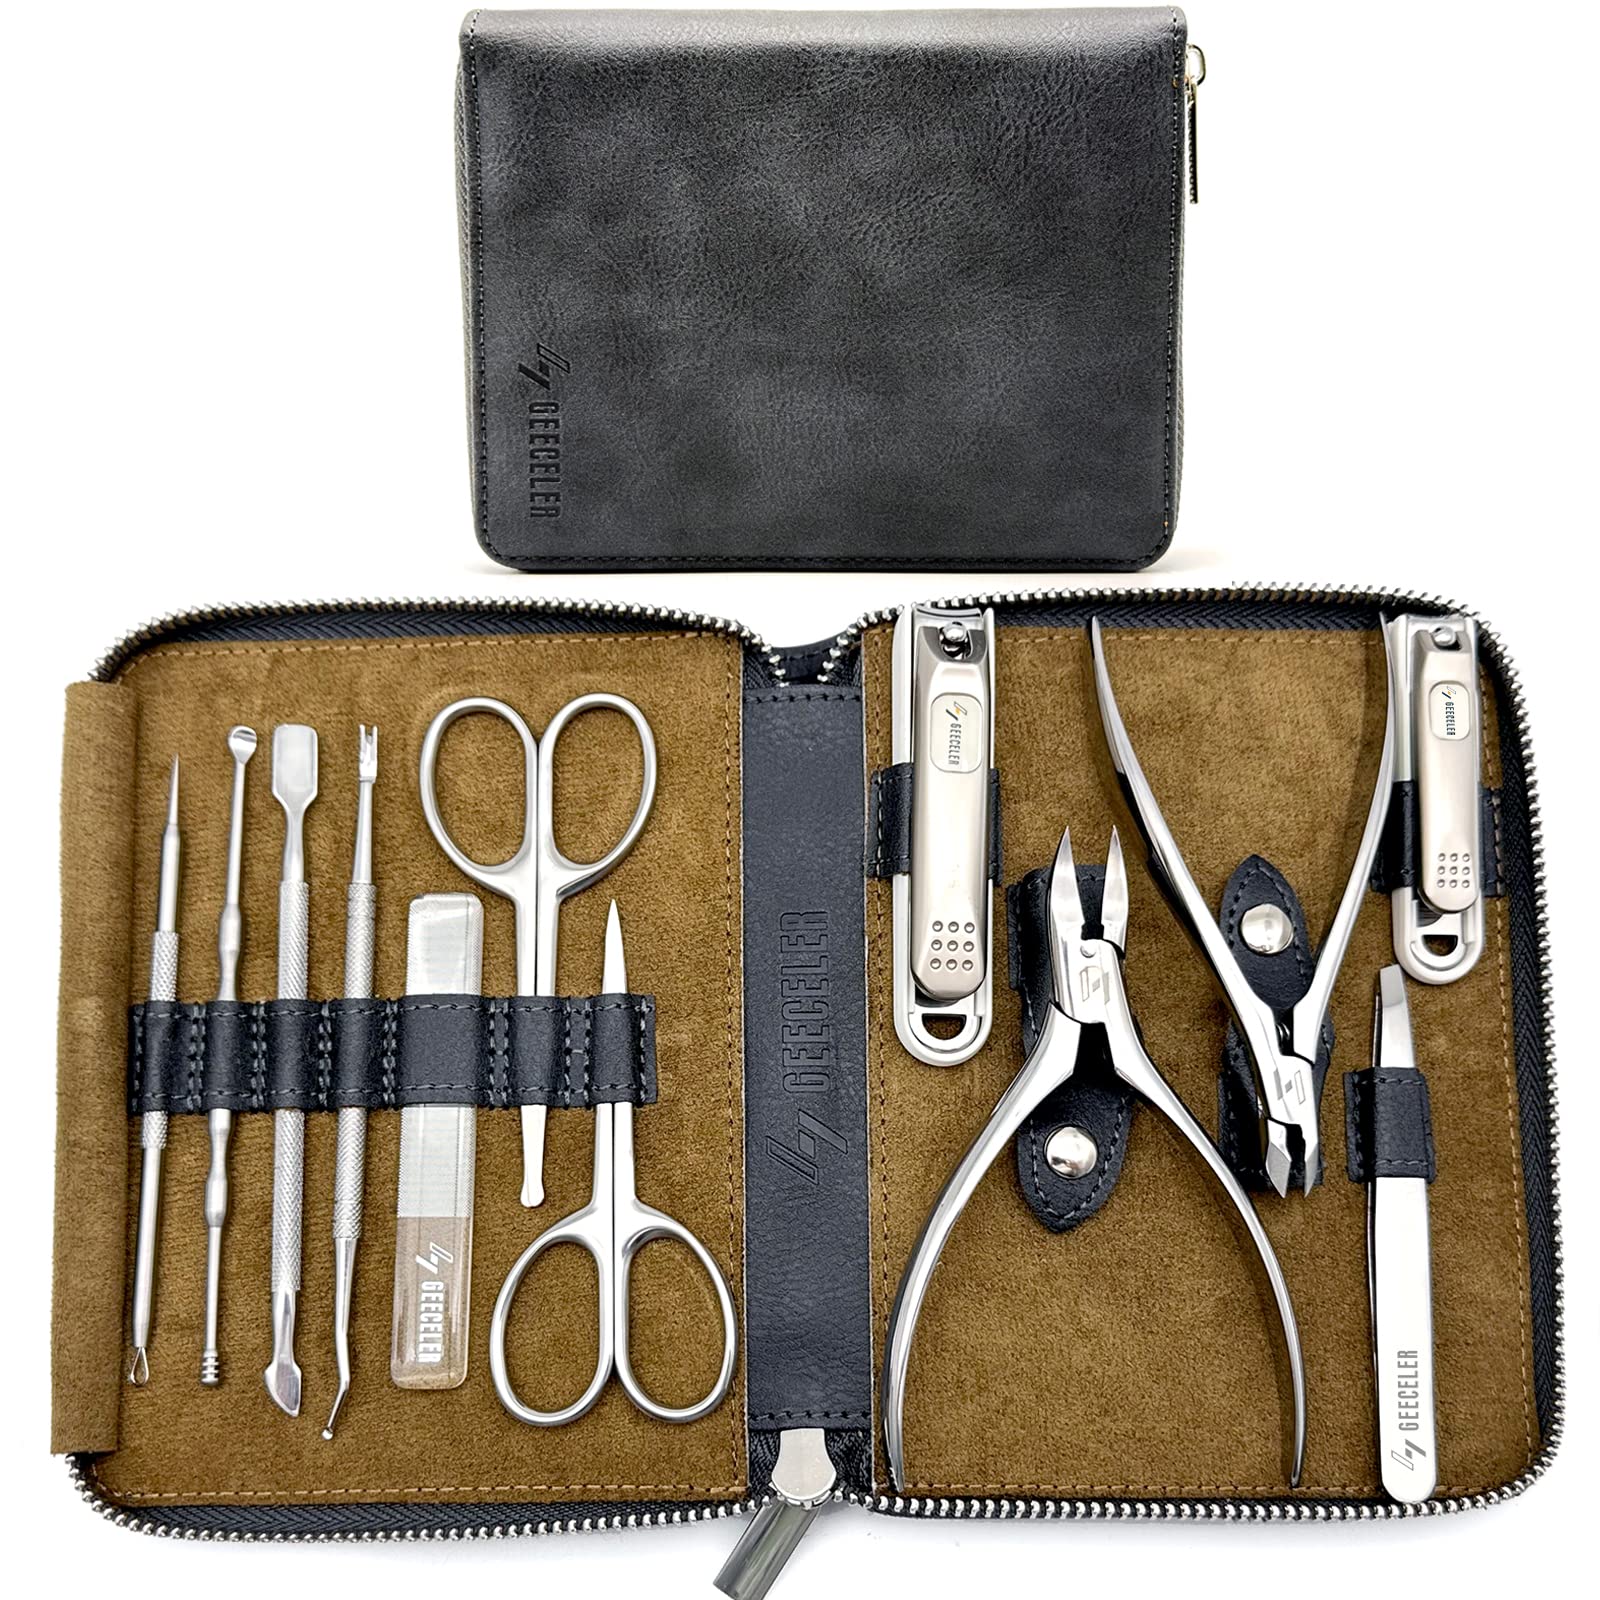 Men's Manicure Set l Nail Care & Clippers Grooming Tools Kit